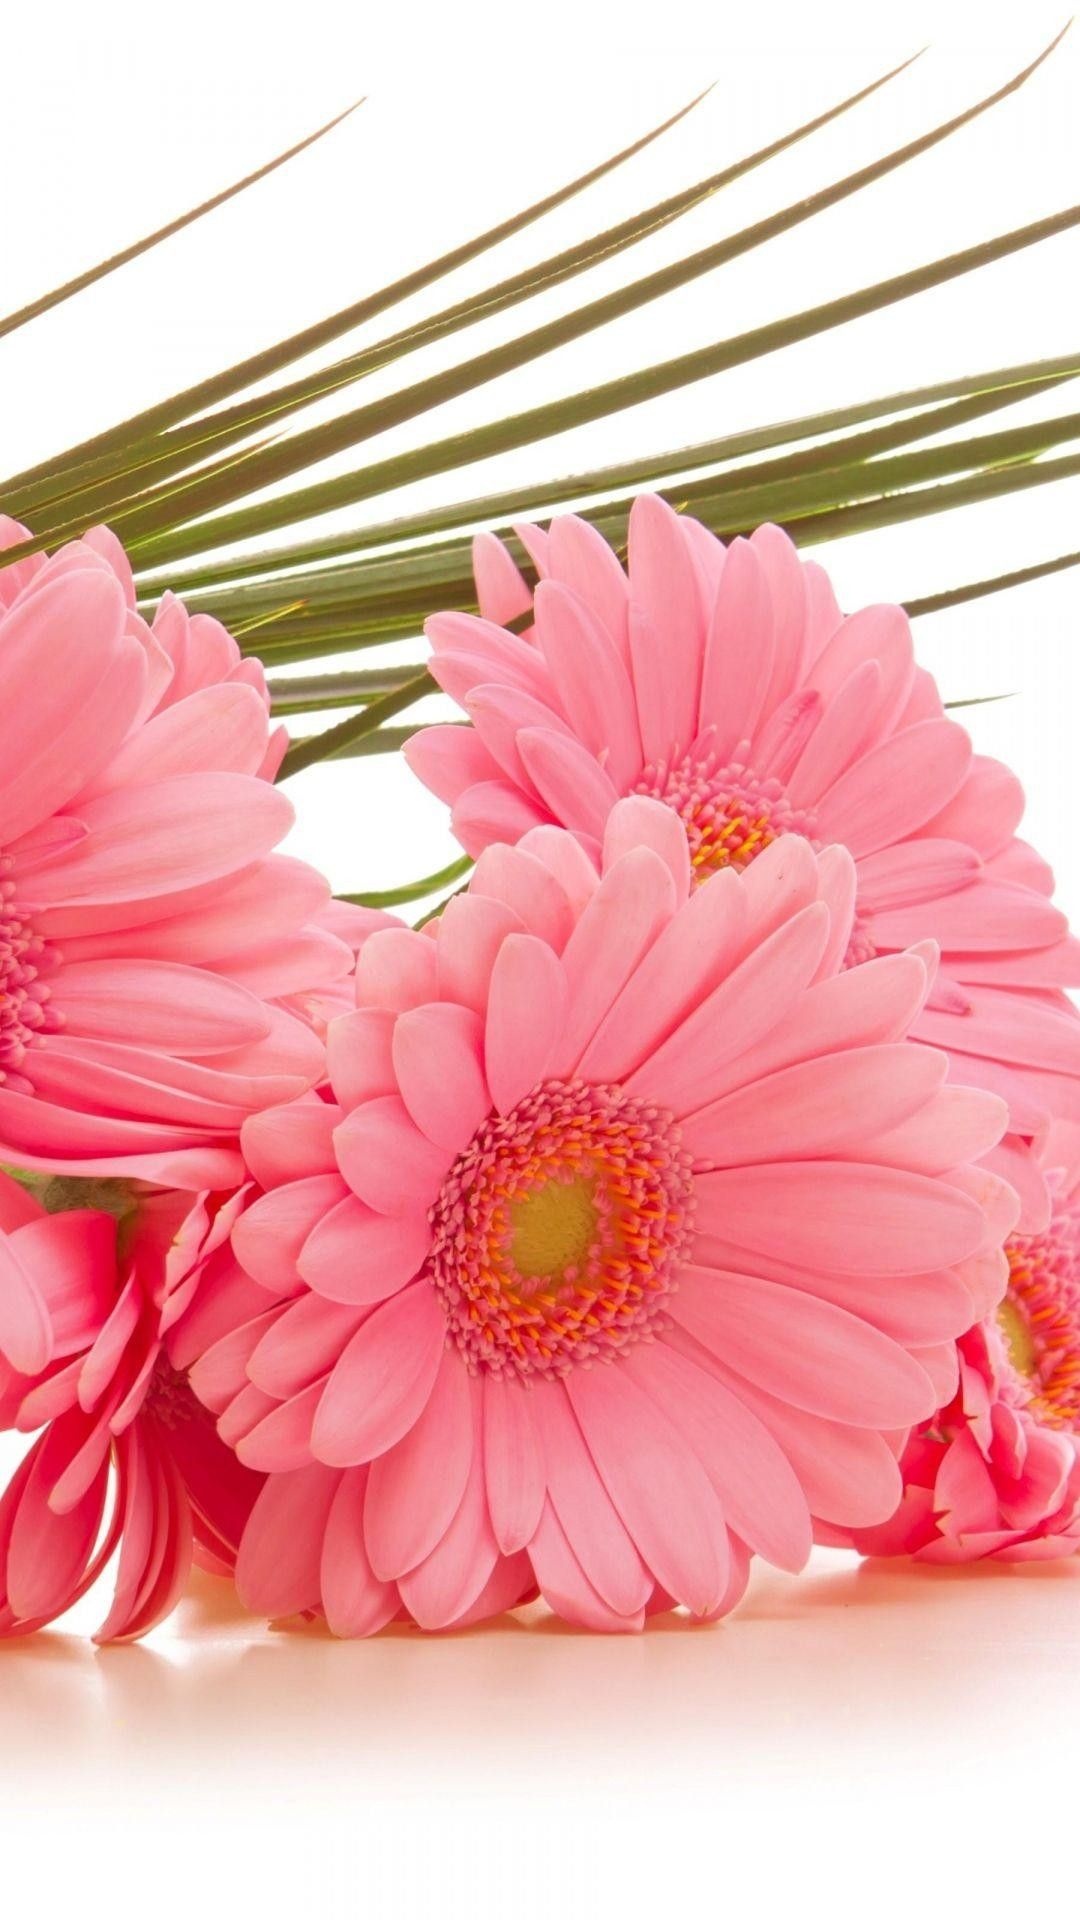 Gerbera Daisy: Daisy-like blooms grow to 5 inches wide with layers of thin petals. 1080x1920 Full HD Background.